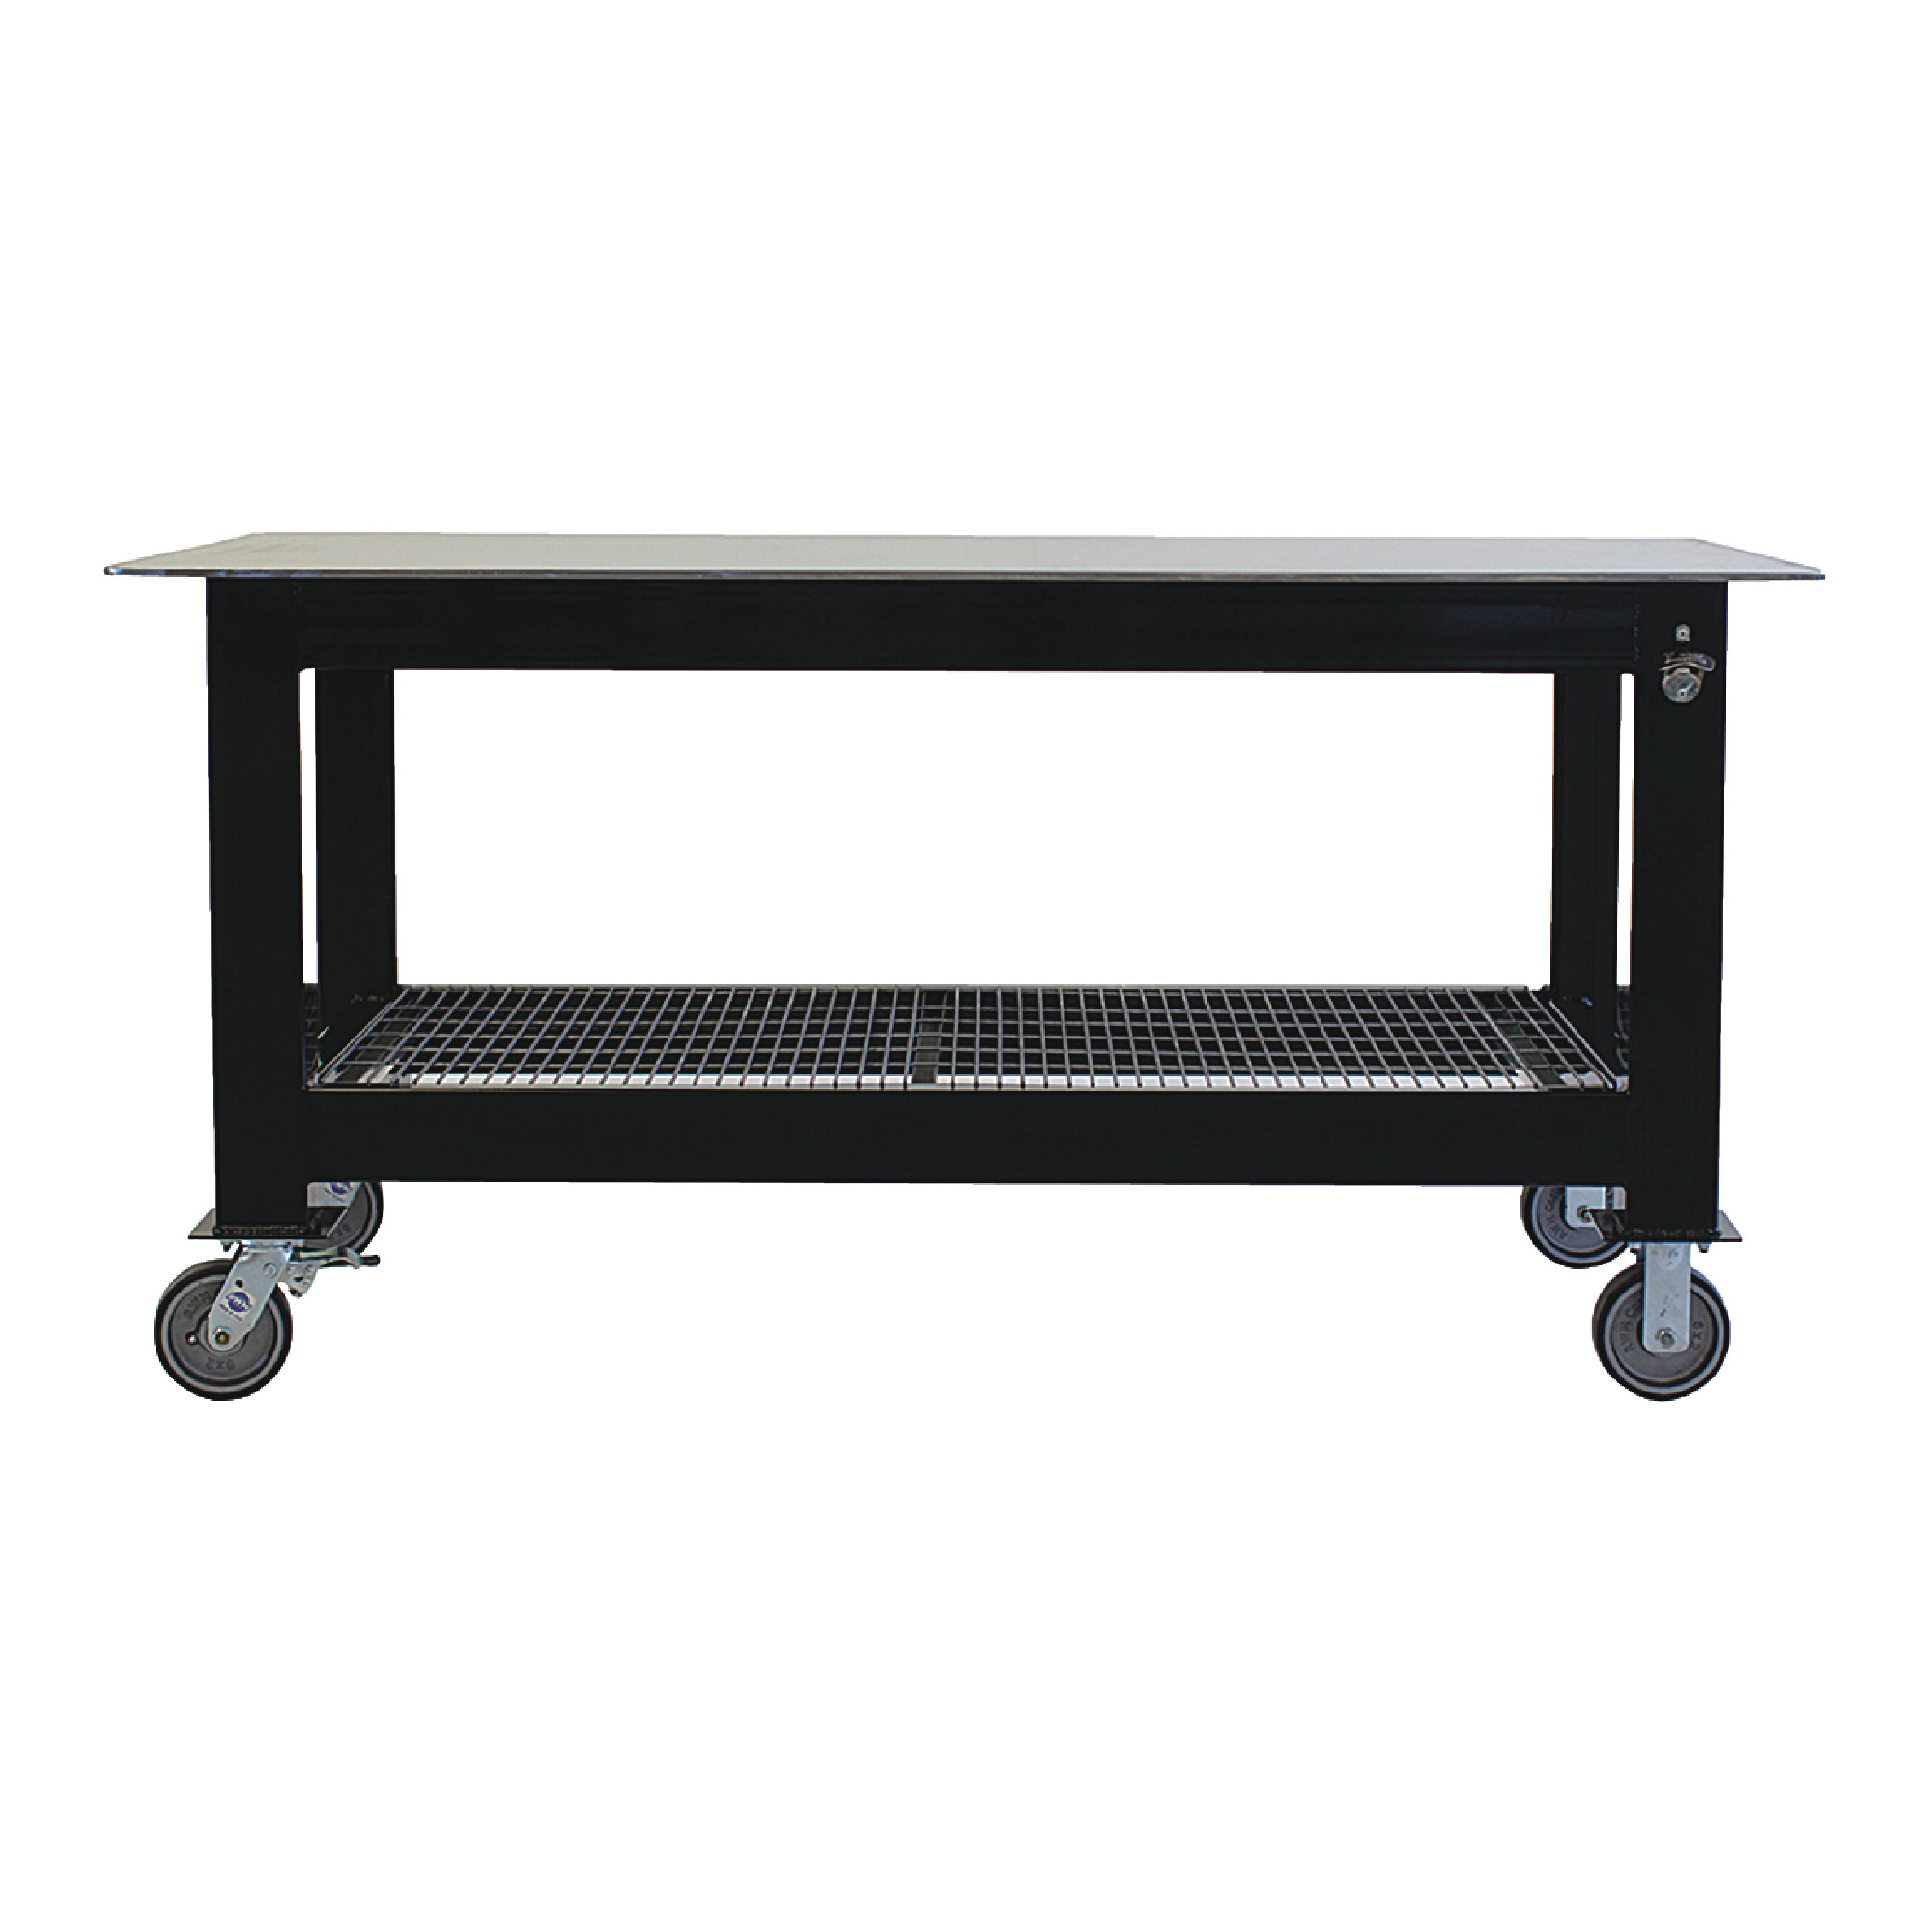 Welding Table With 1/4" Plate Steel Top & Casters